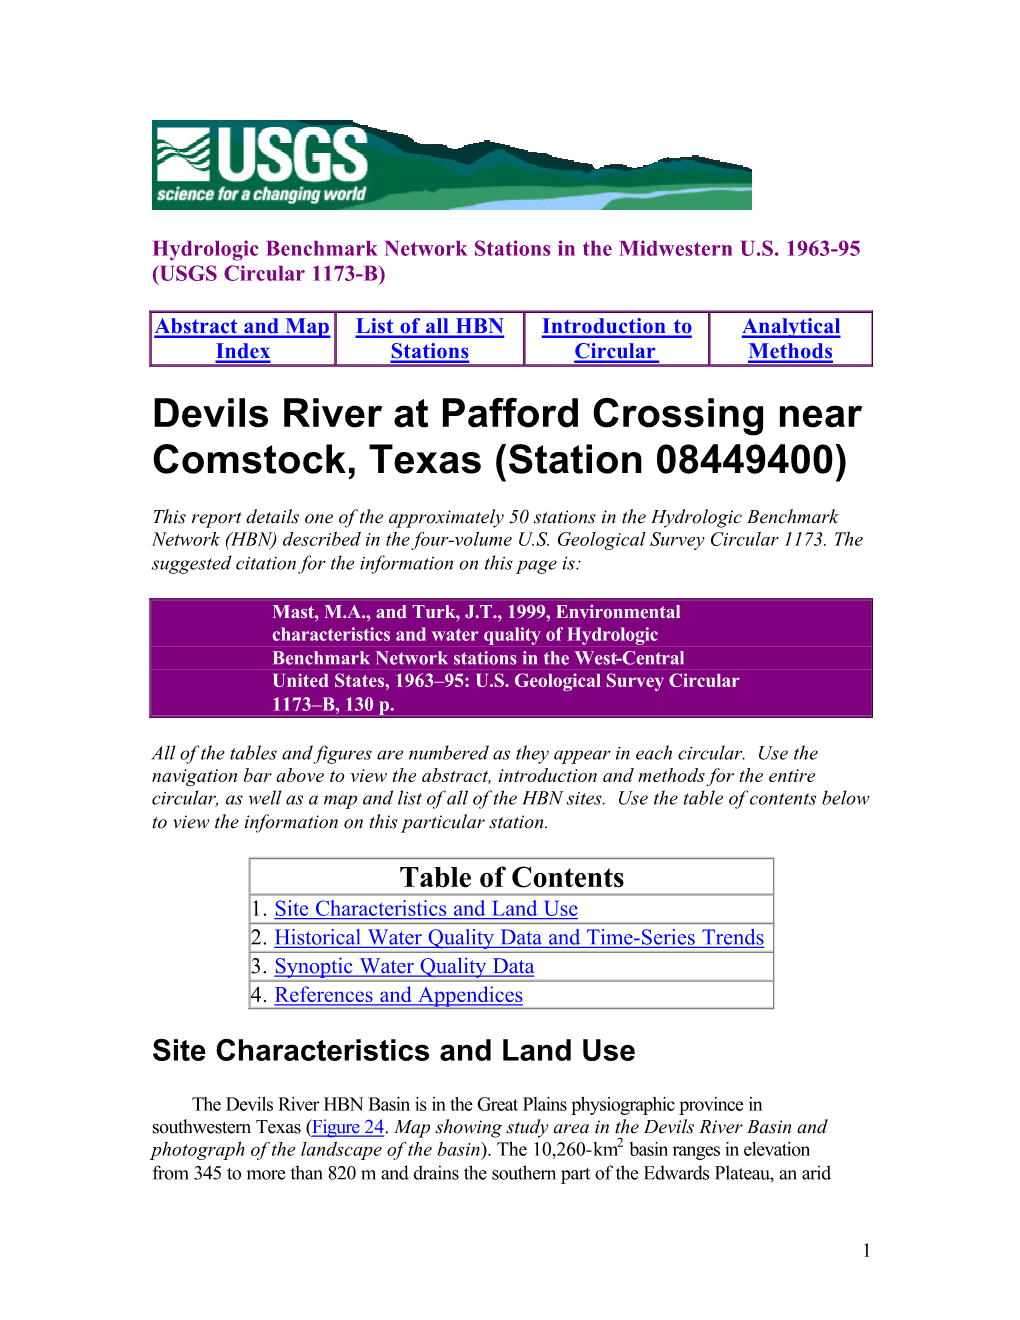 Devils River at Pafford Crossing Near Comstock, Texas (Station 08449400)